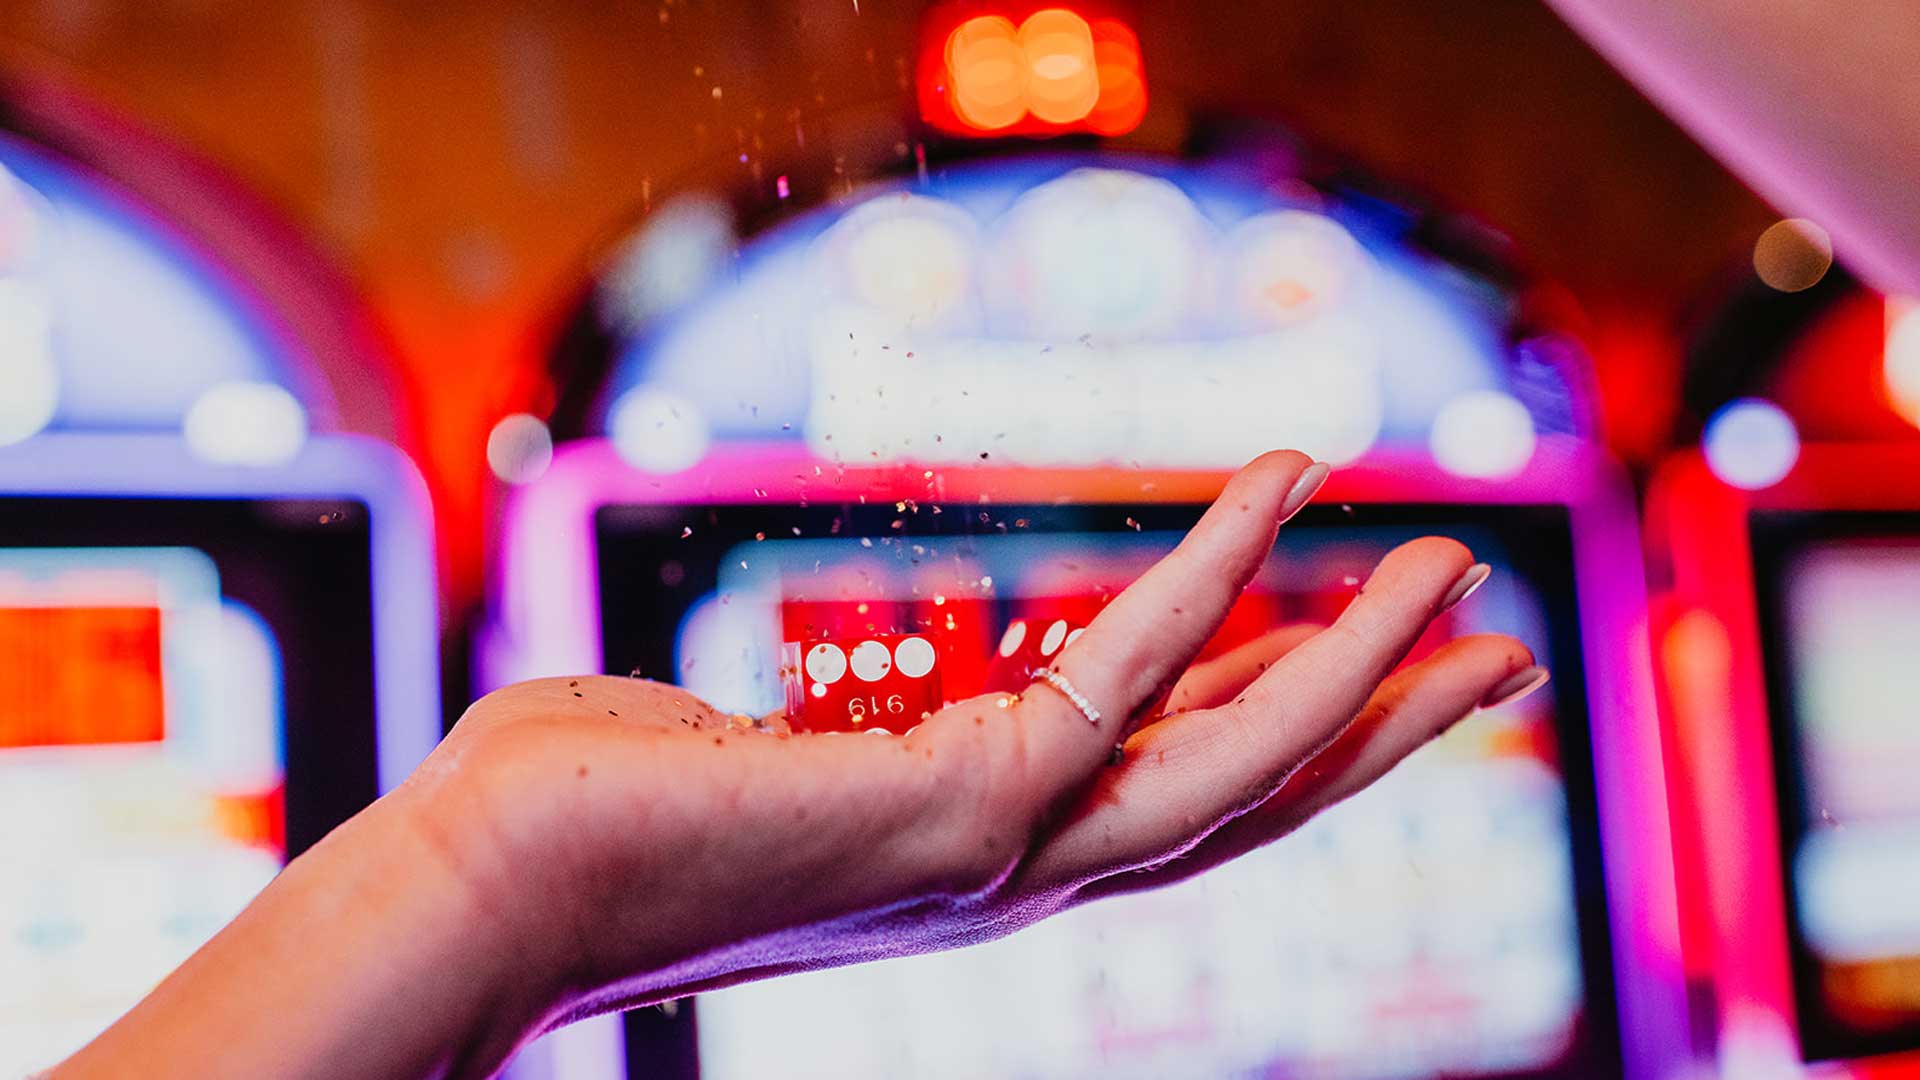 What are the essential documents required to register and login into a casino site?